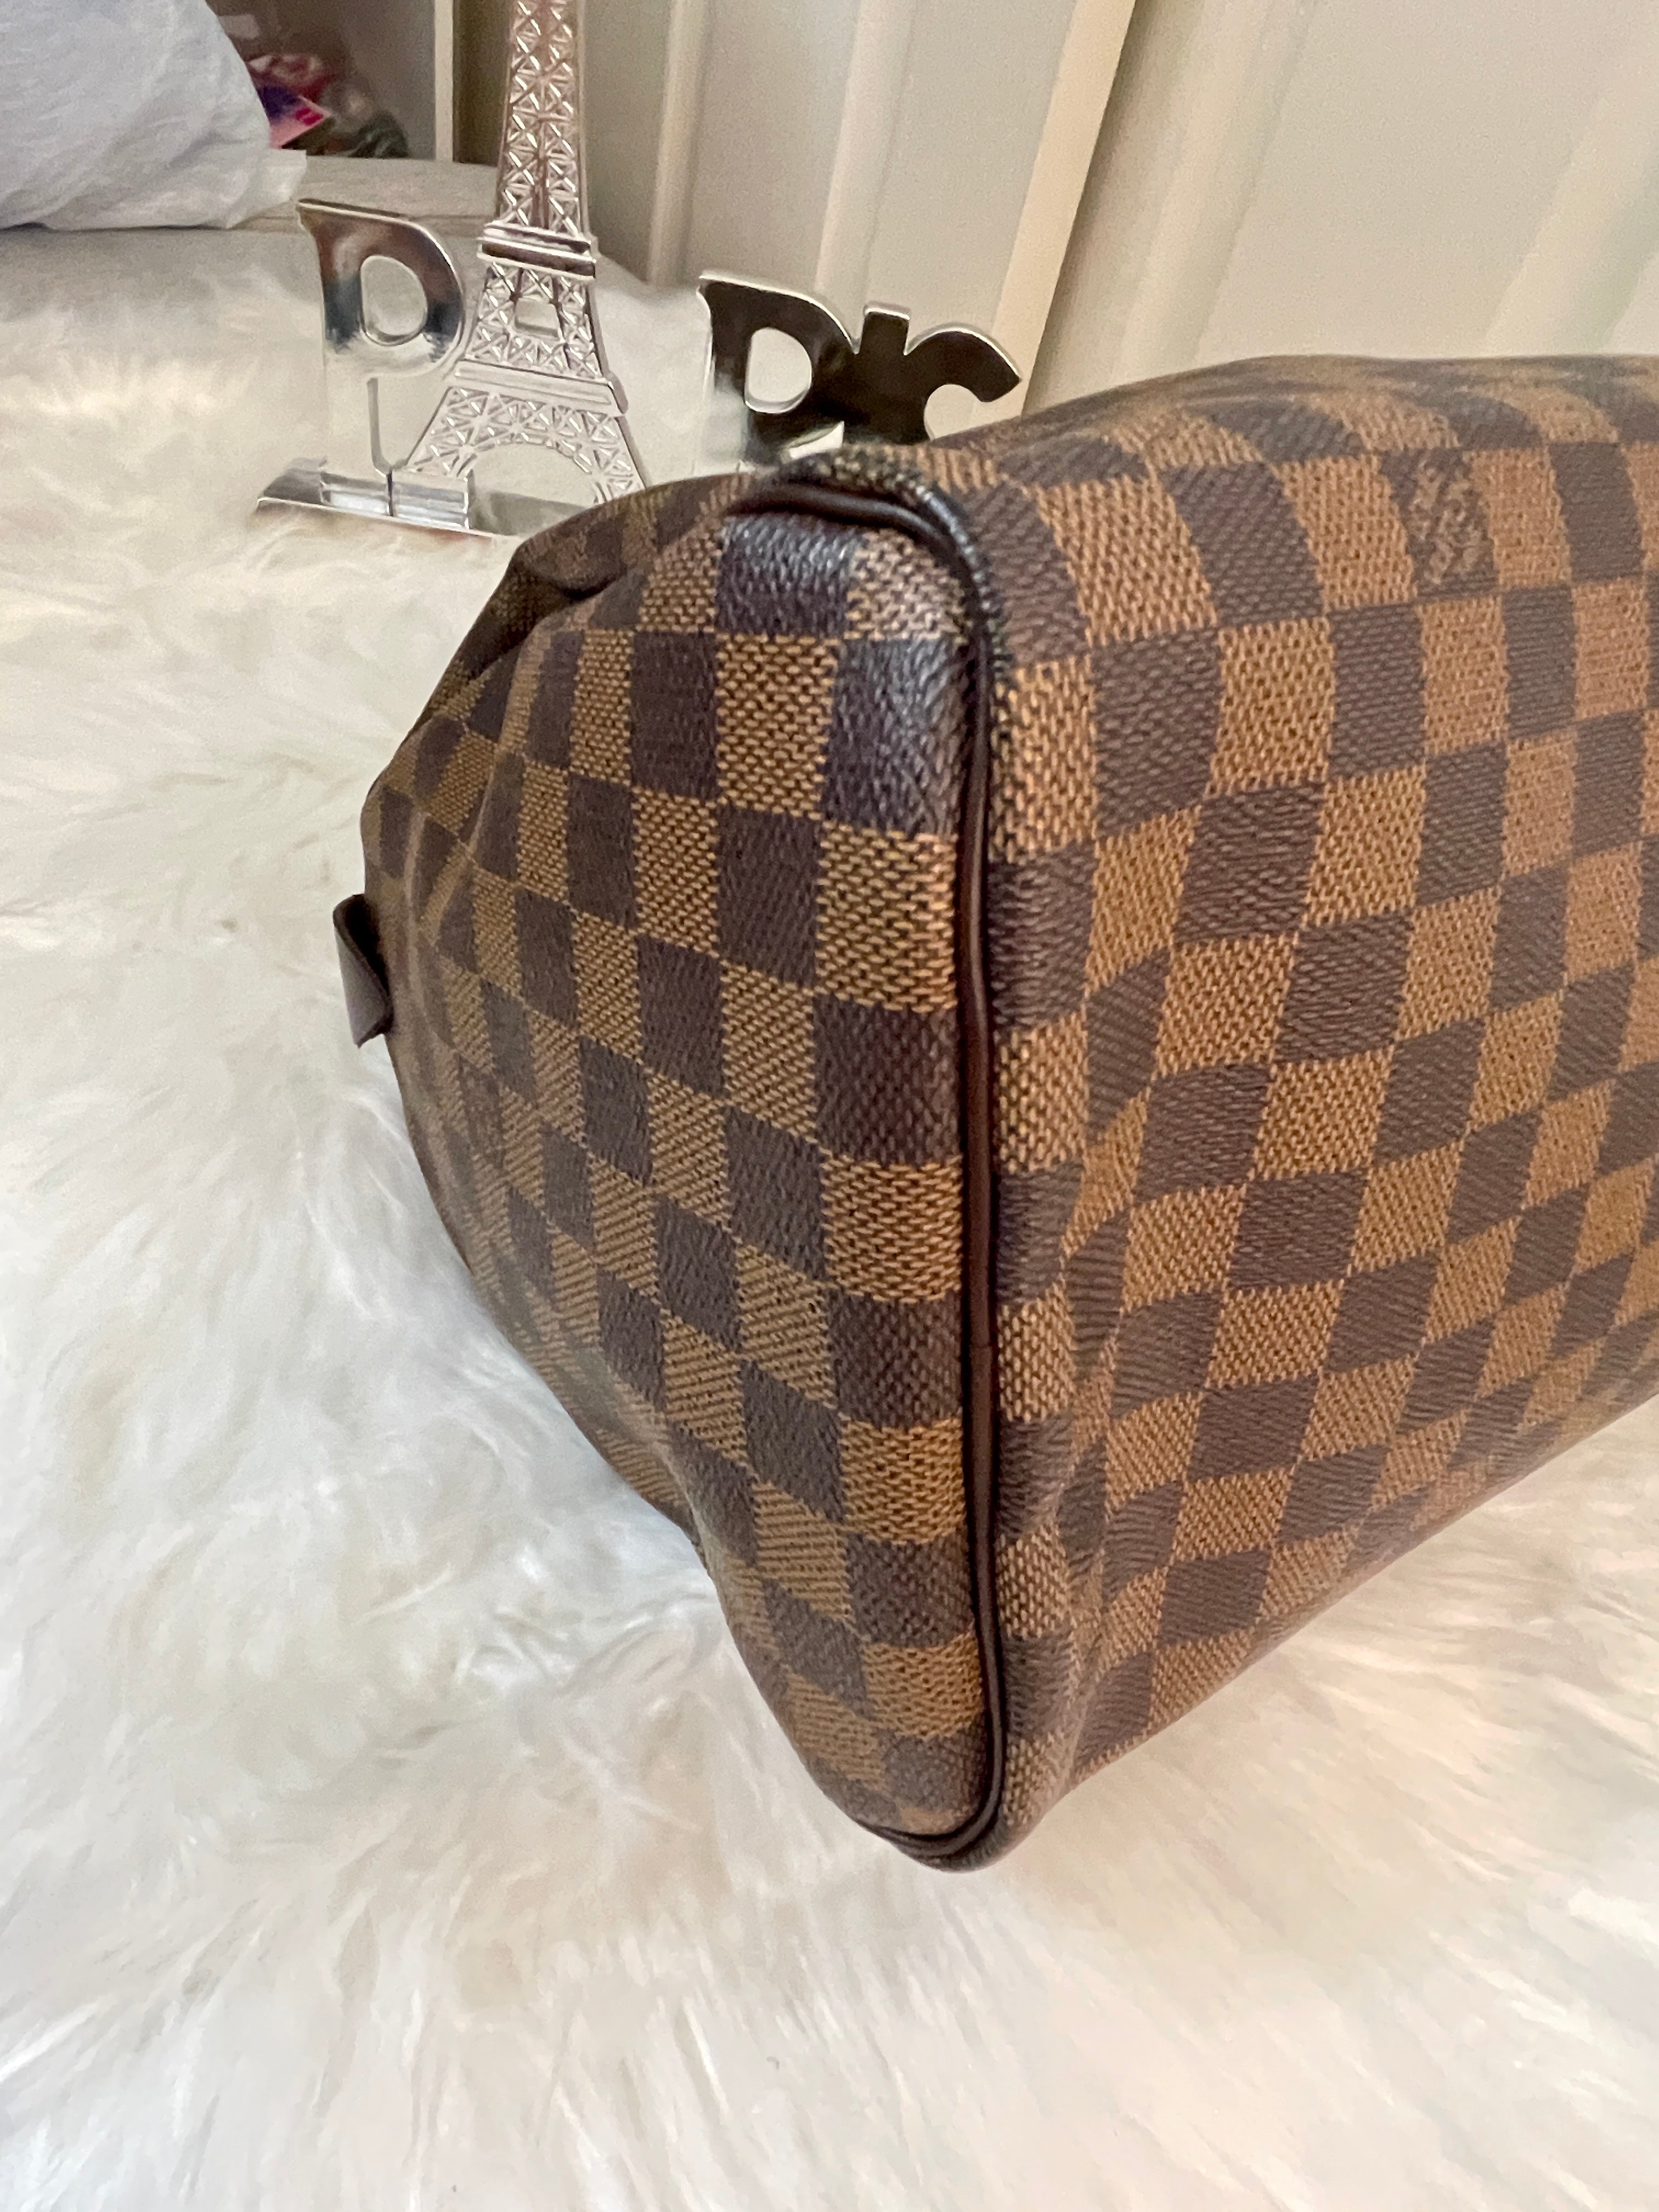 Diane leather handbag Louis Vuitton Brown in Leather - 35135975